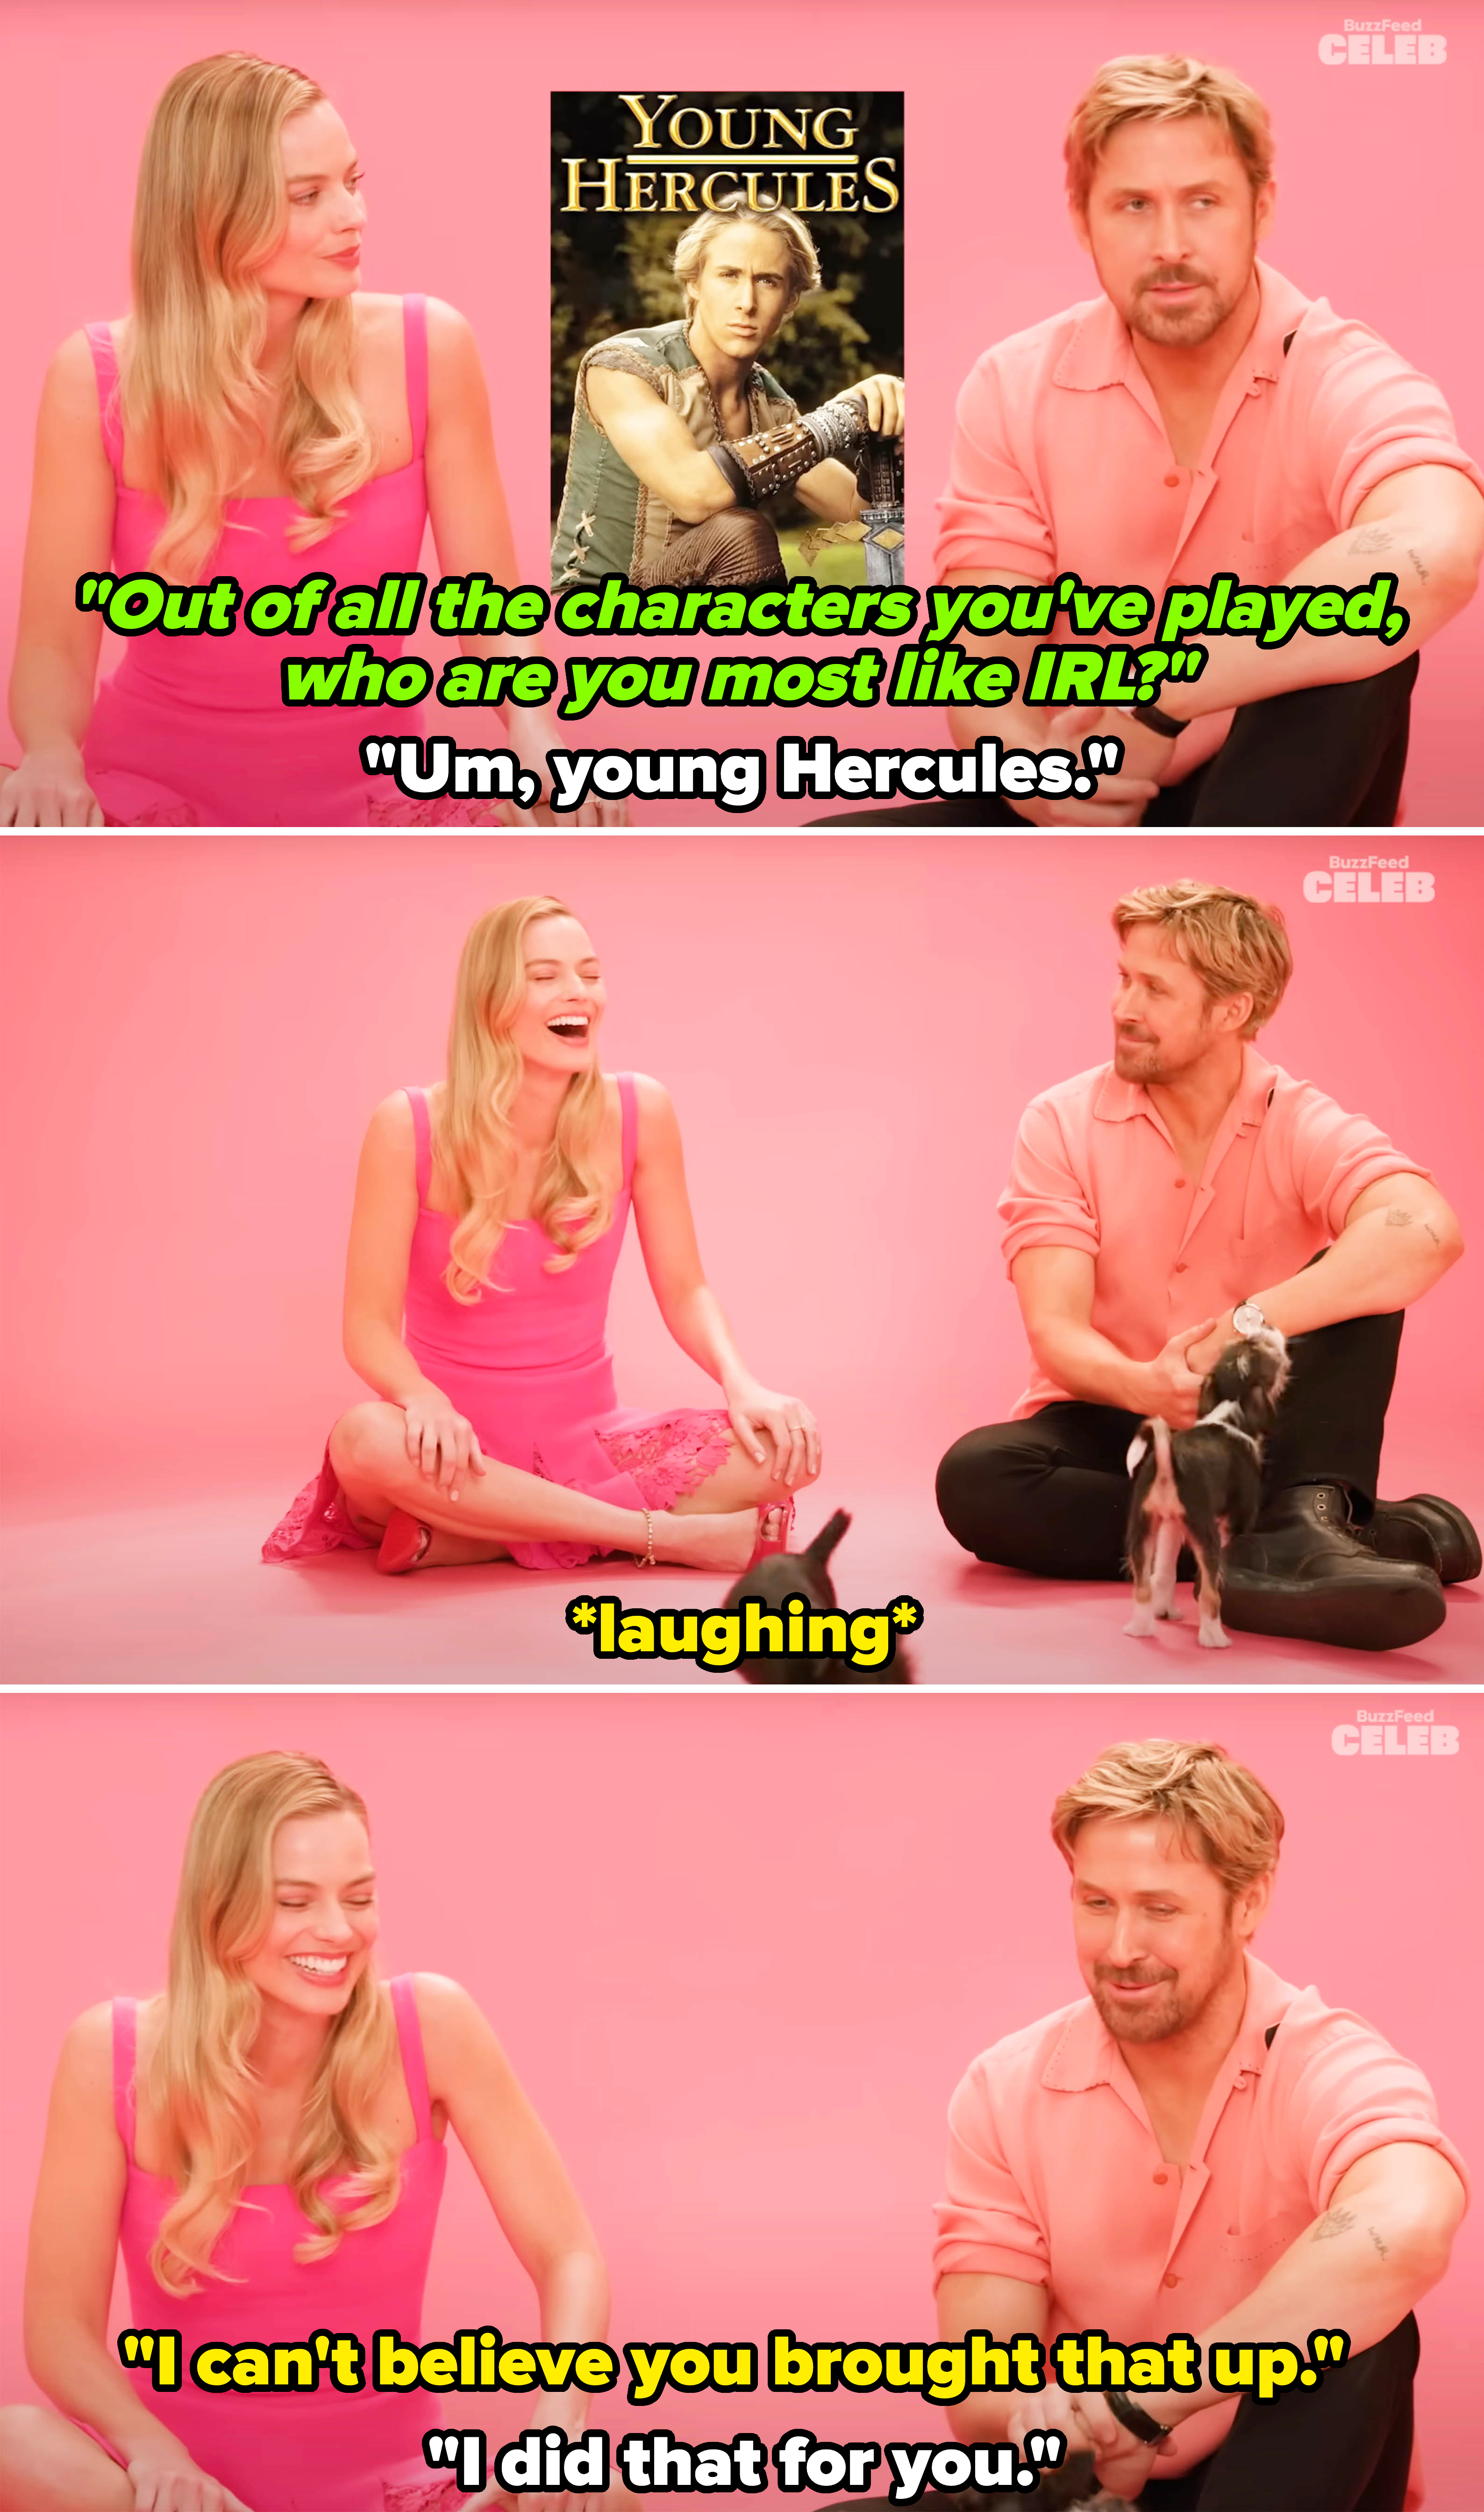 margot laughing and ryan says he brought up young hercules for her